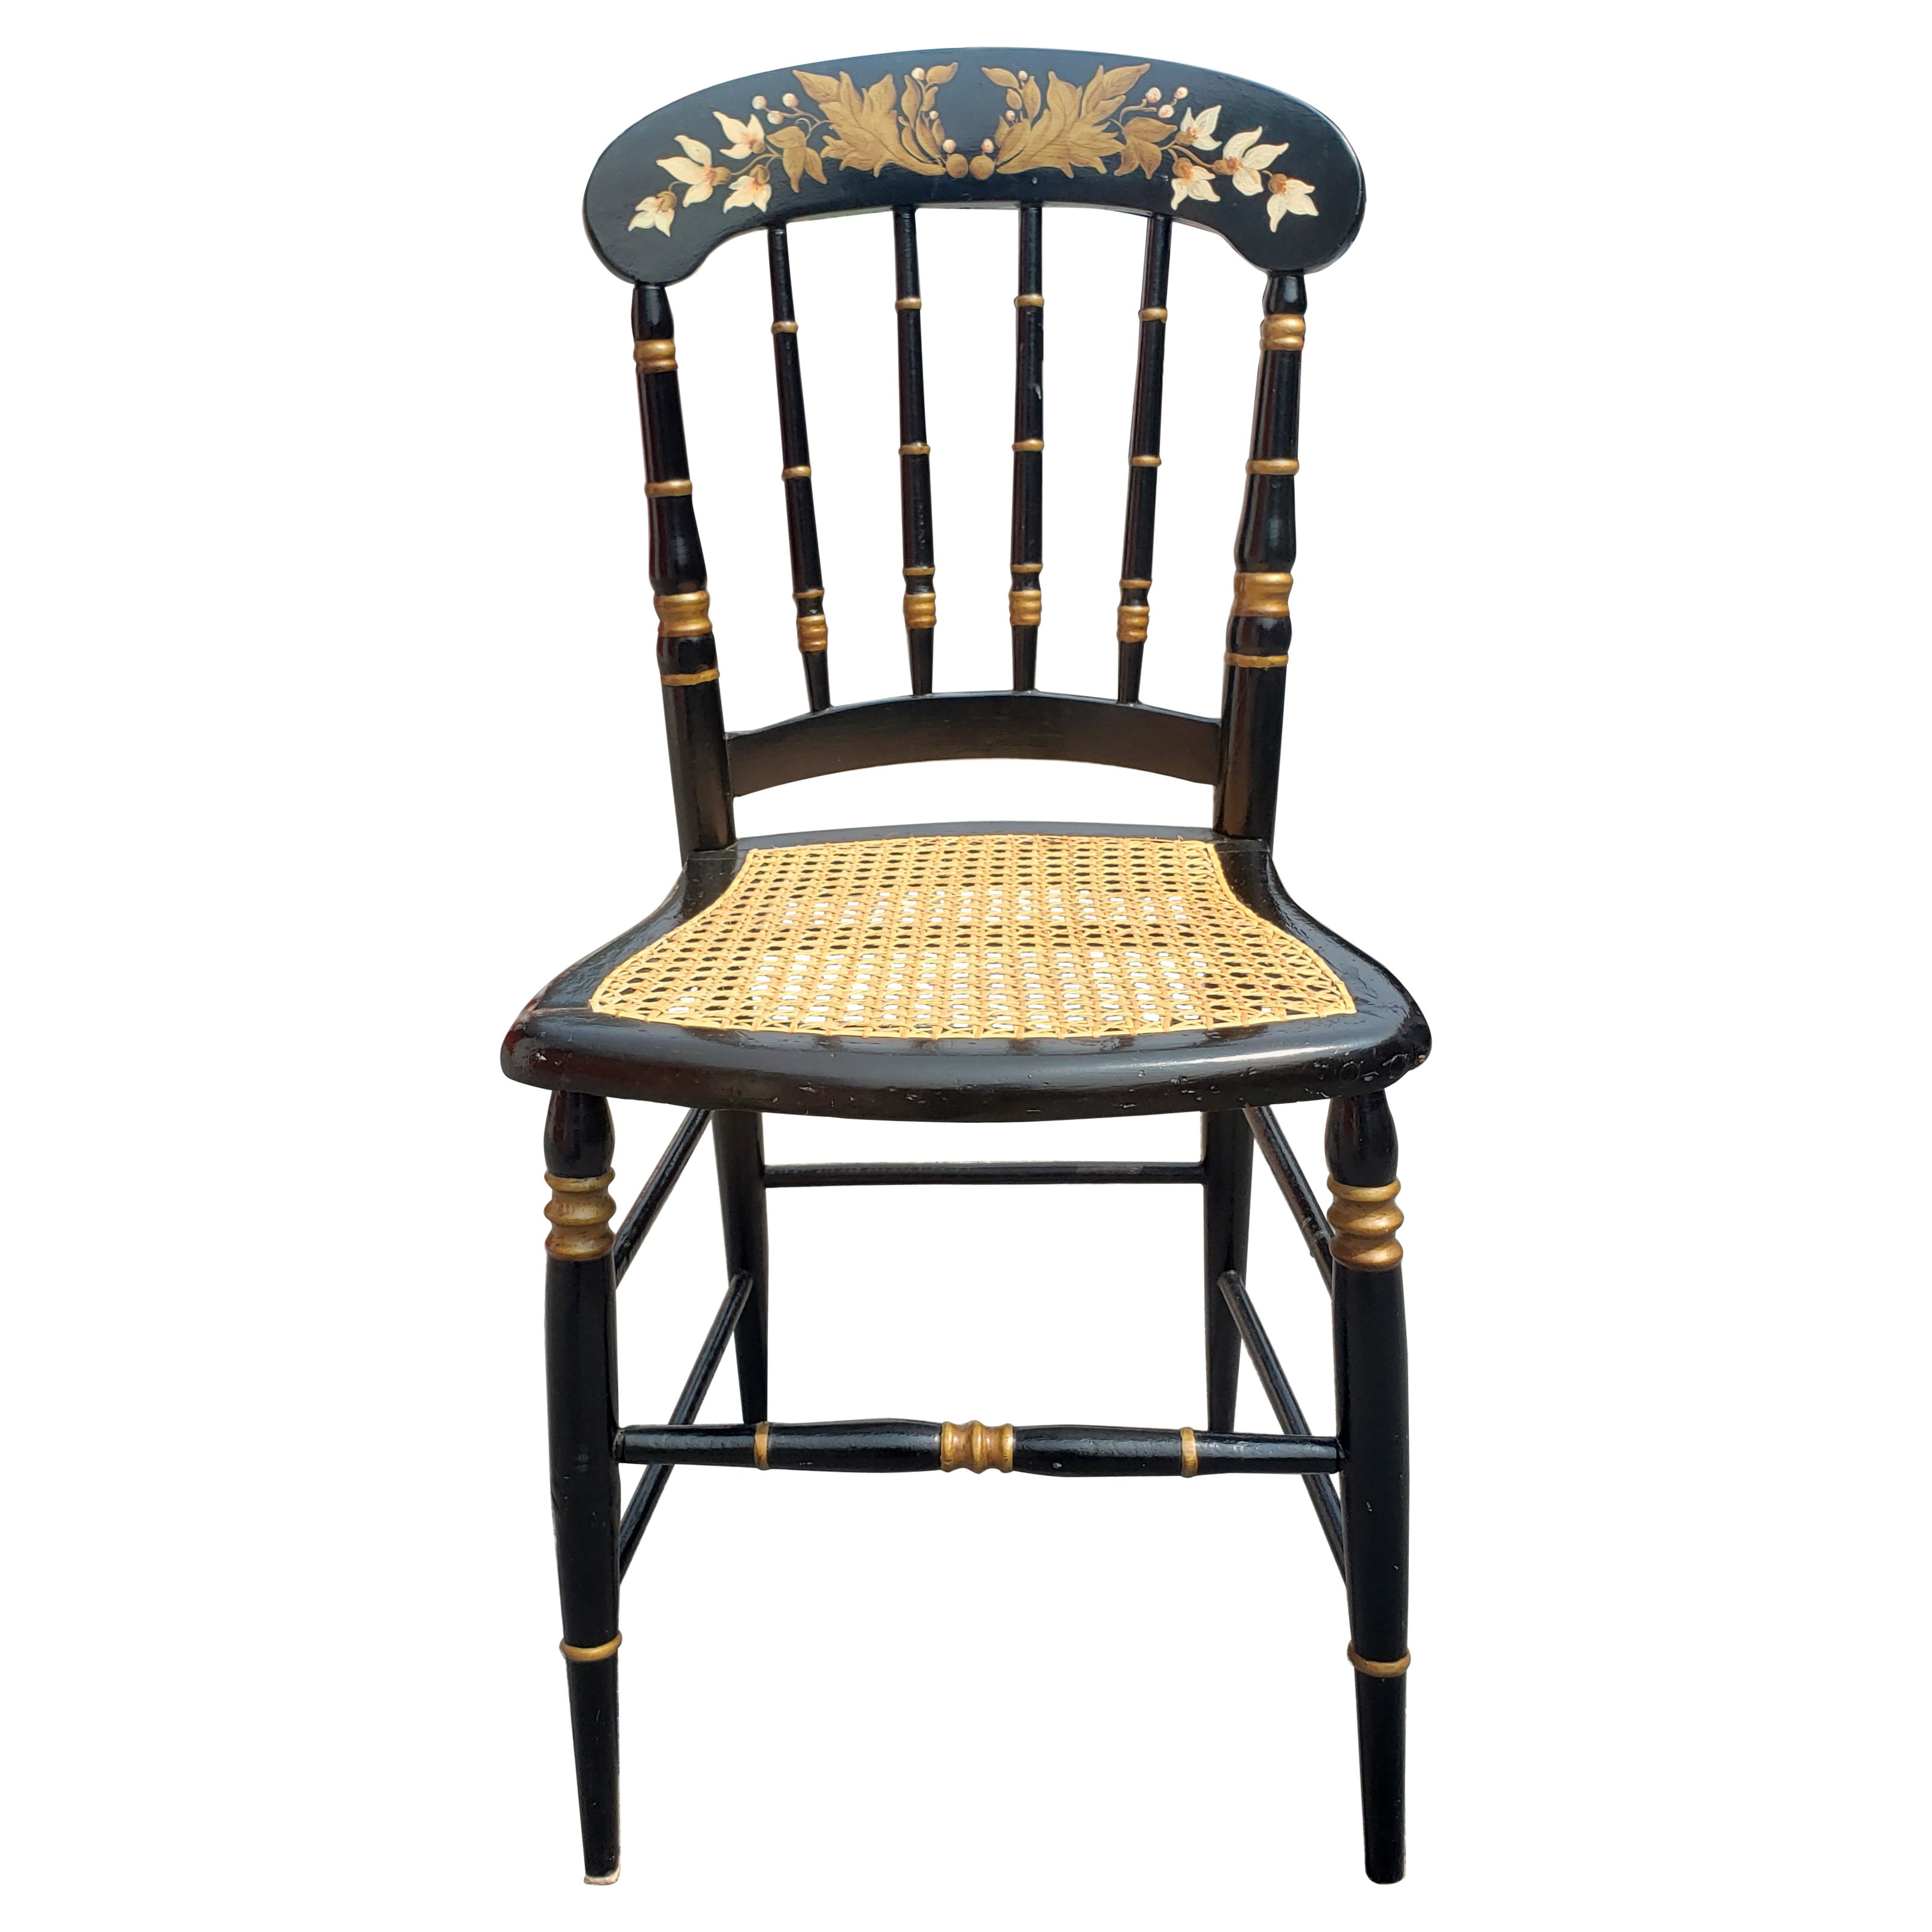 Late 19th Century Ebonized and Parcel Gilt Decorated Cane Seat Side Chair For Sale